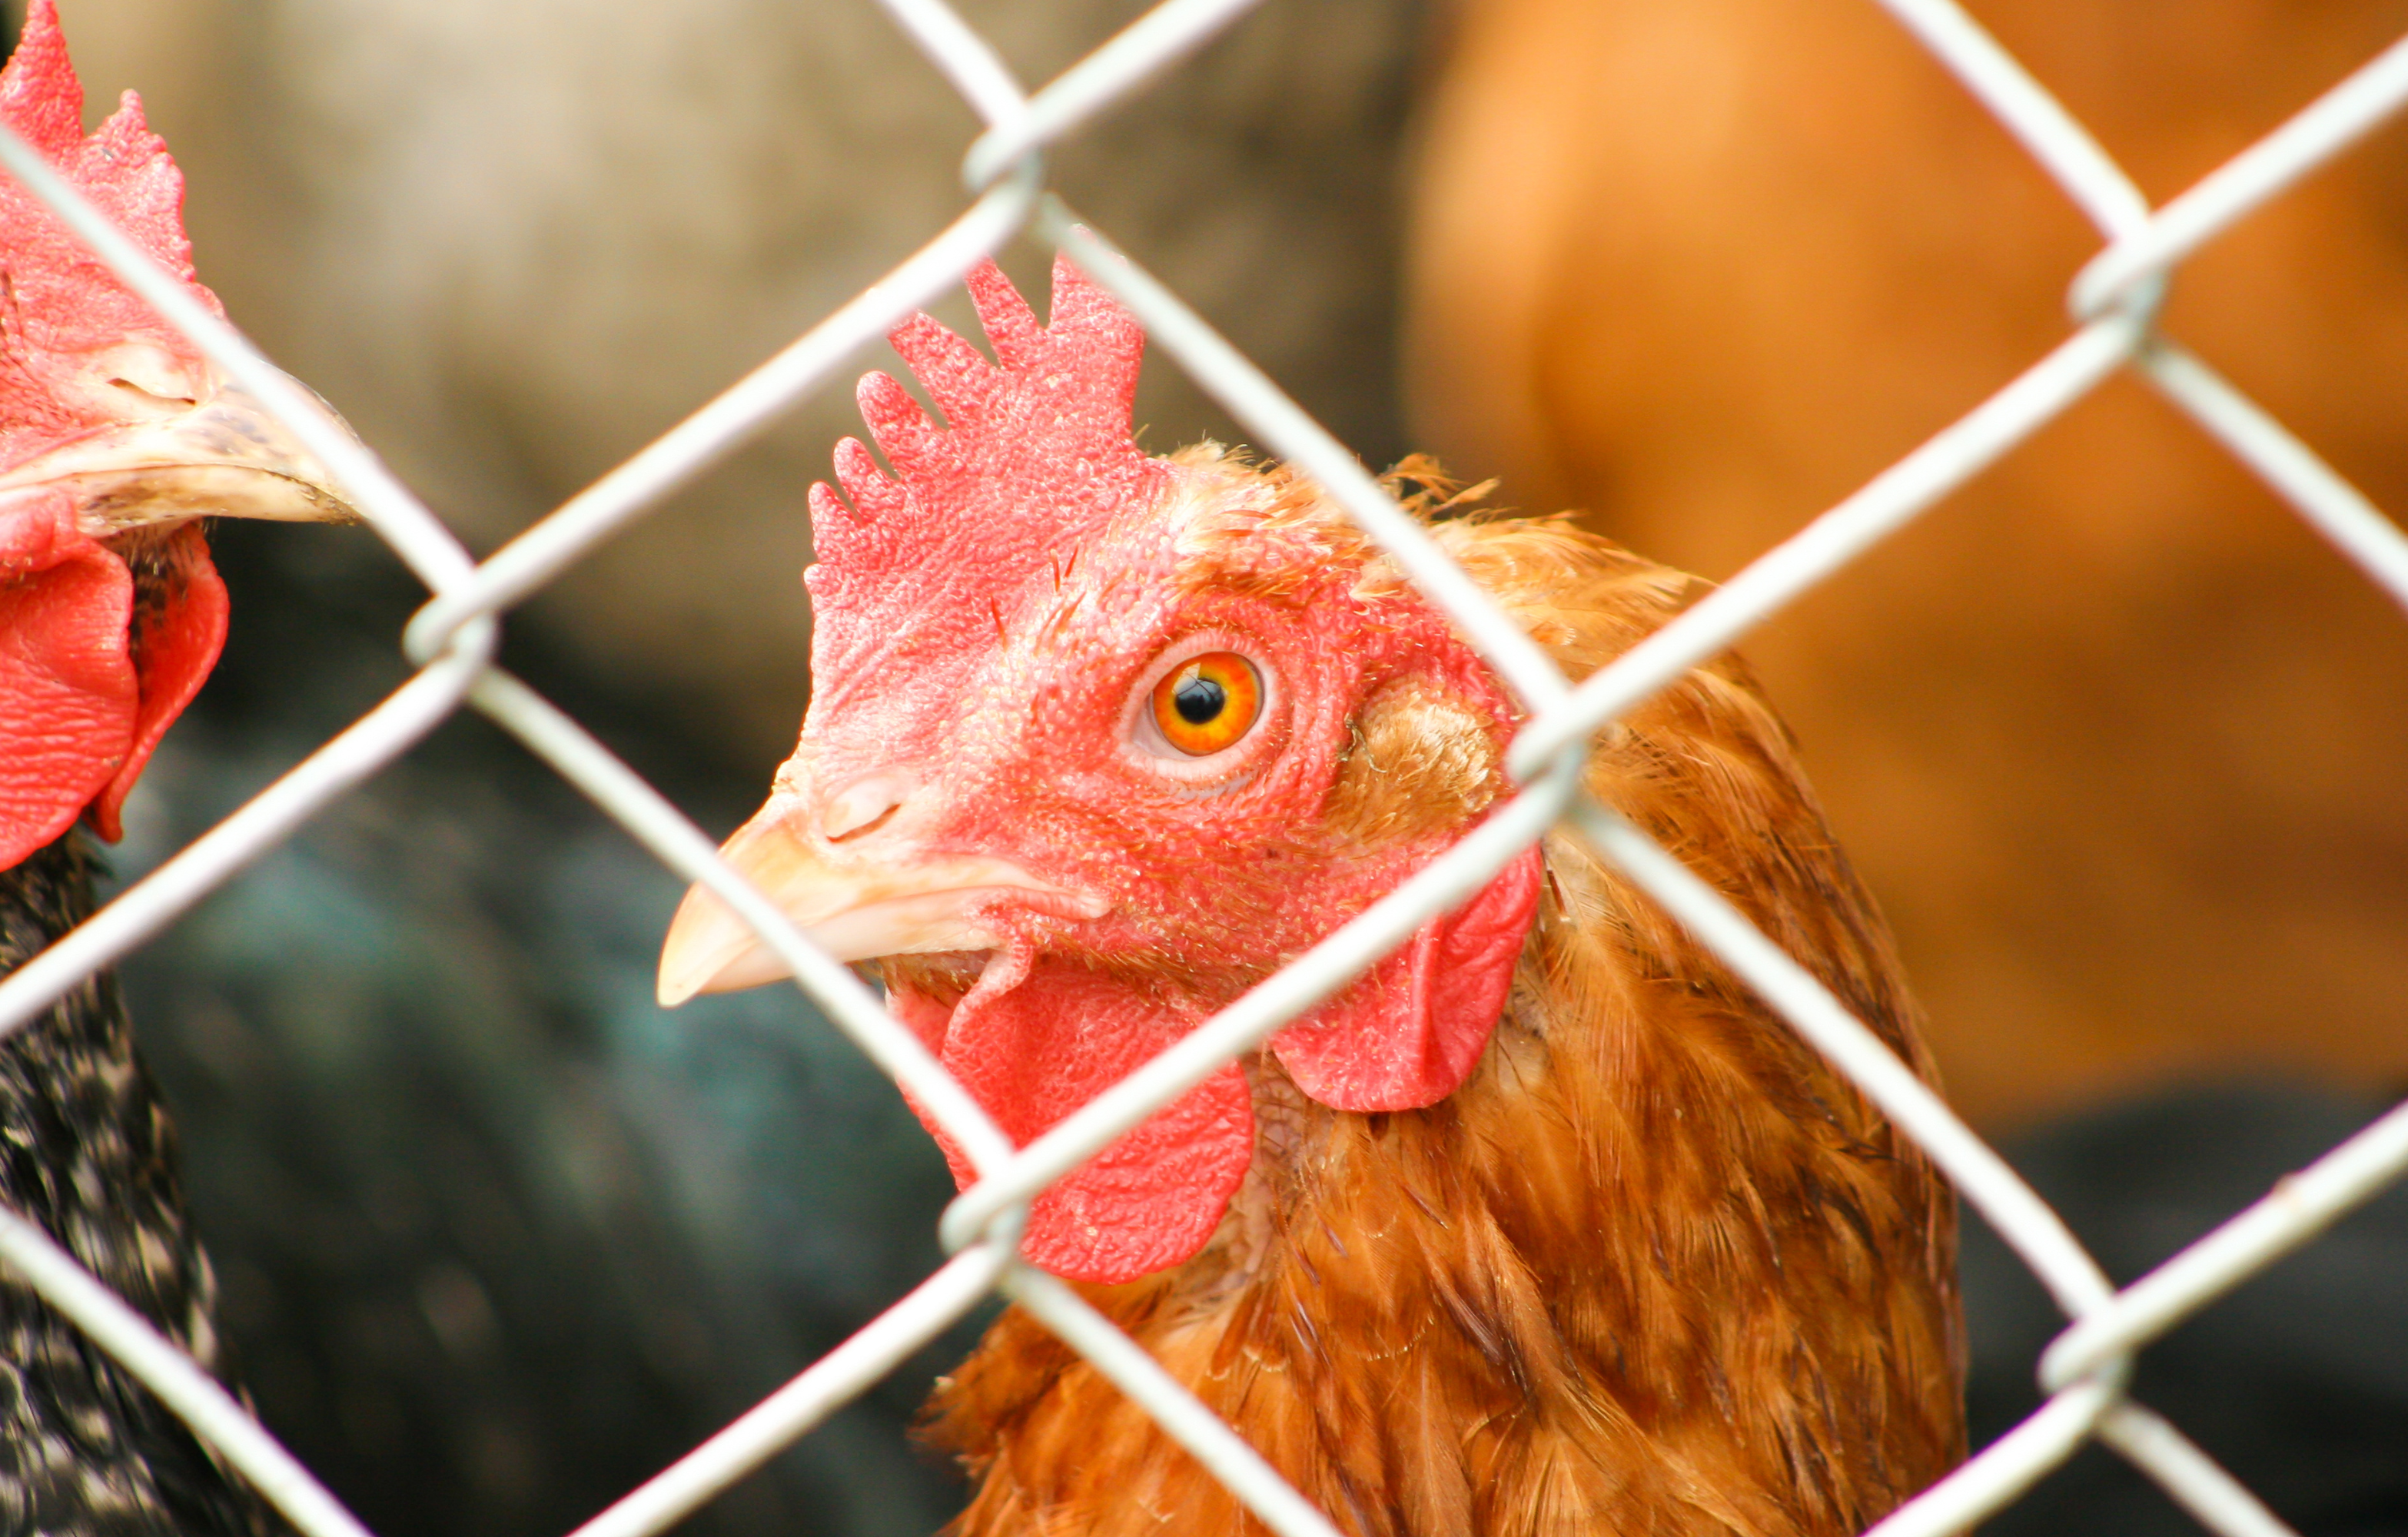 10 Queries About Chicken Nets That Homeowners & DIYers Have